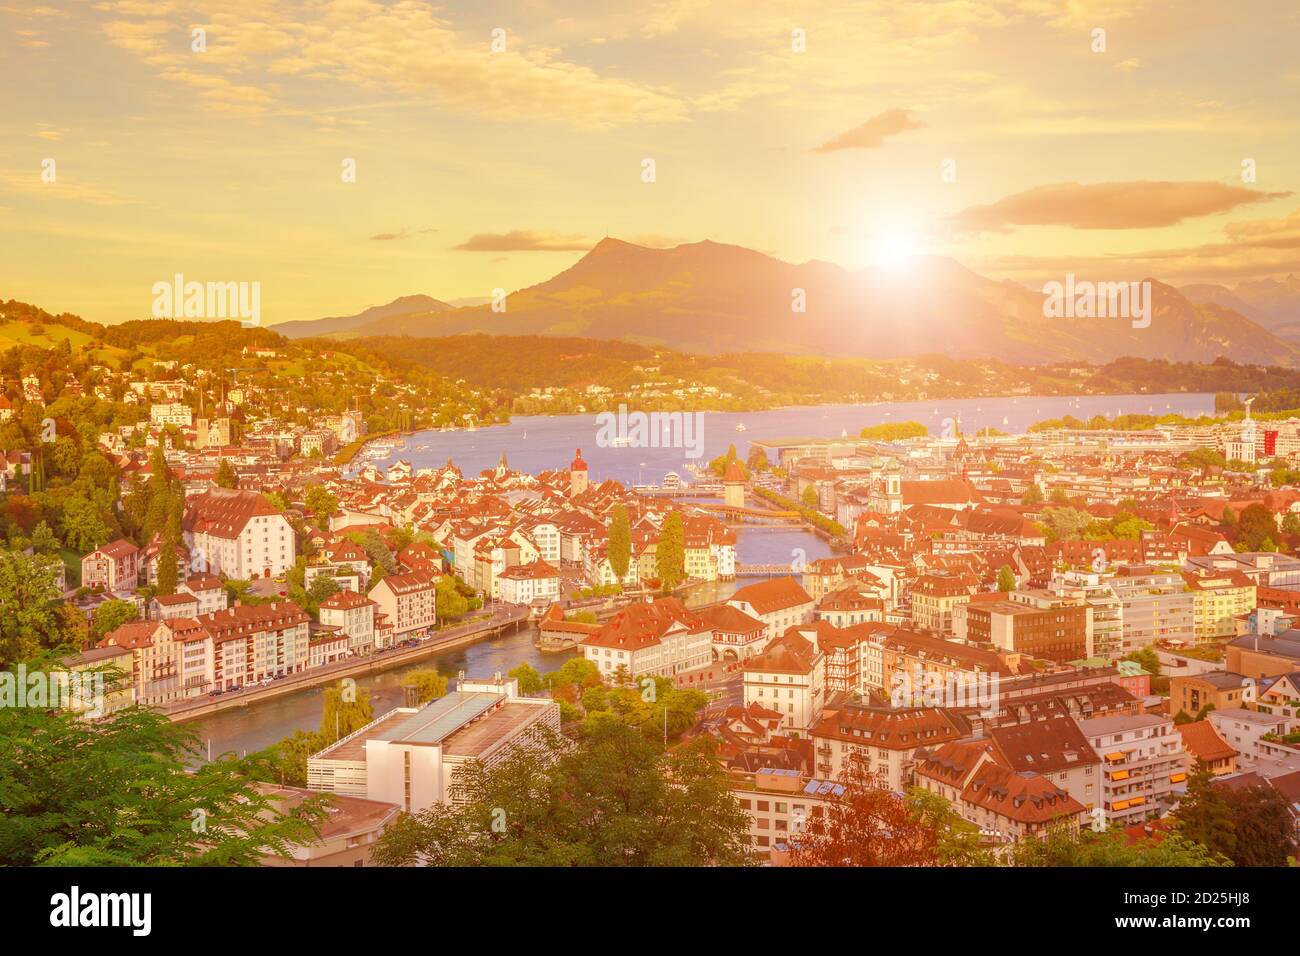 Aerial view of Lucerne cityscape skyline and Lake Lucerne with Mount Rigi and its peak Rigi-Kulm in the background, Canton of Lucerne, Switzerland Stock Photo